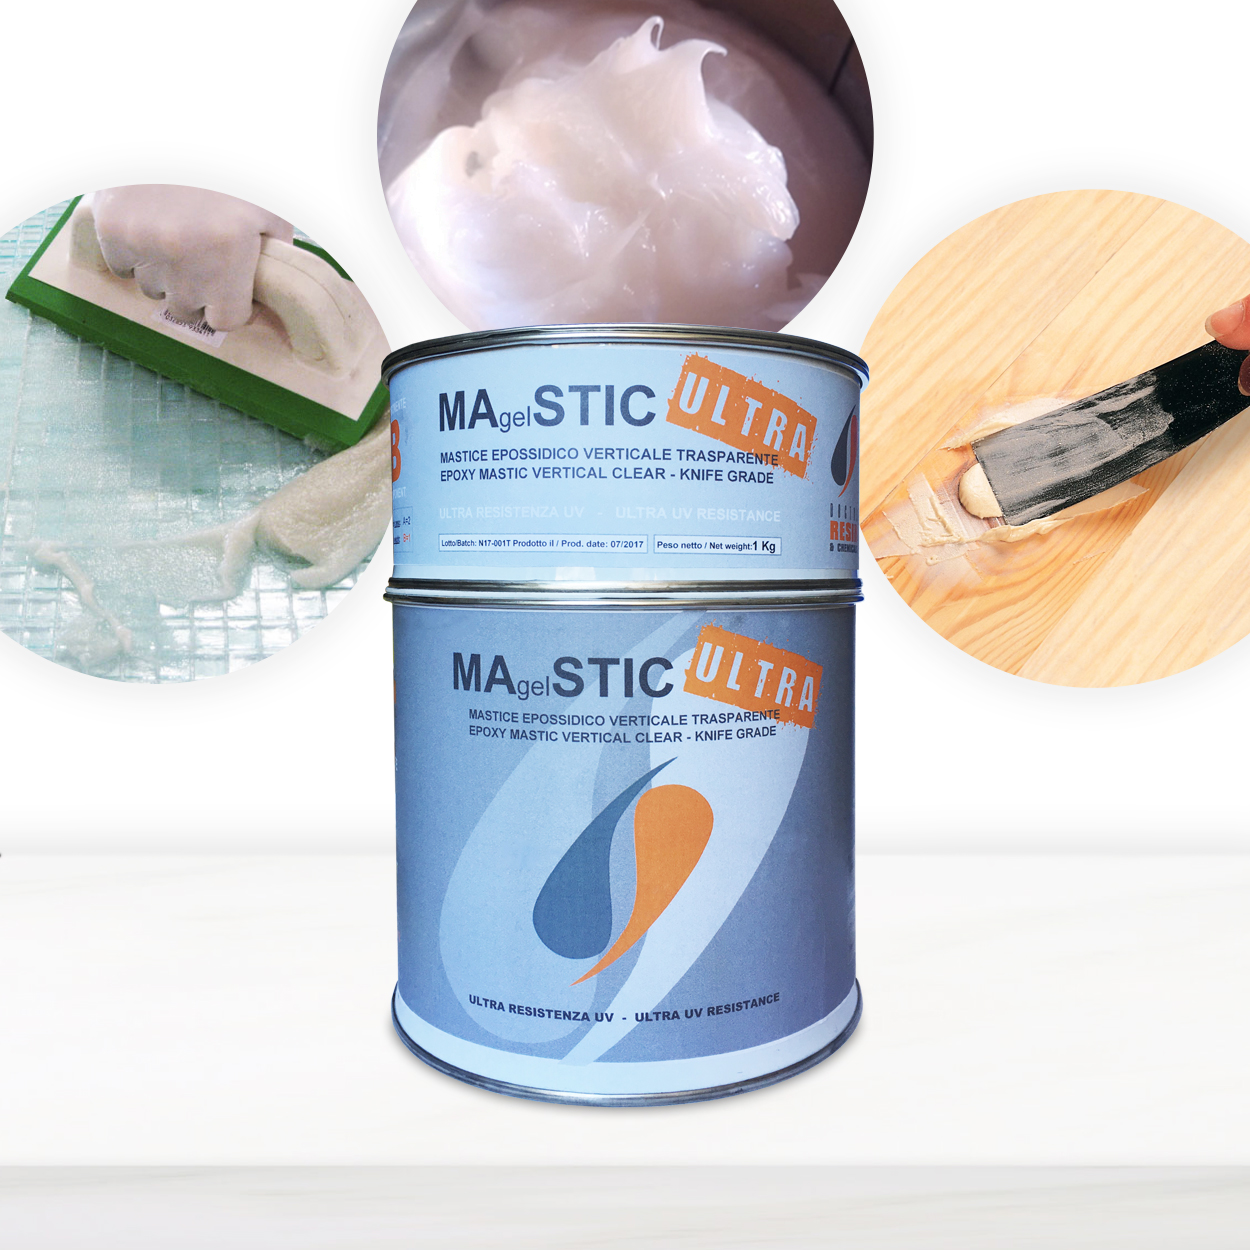 MAgelSTIC Epoxy Mastic - ResinPro - Creativity at your service